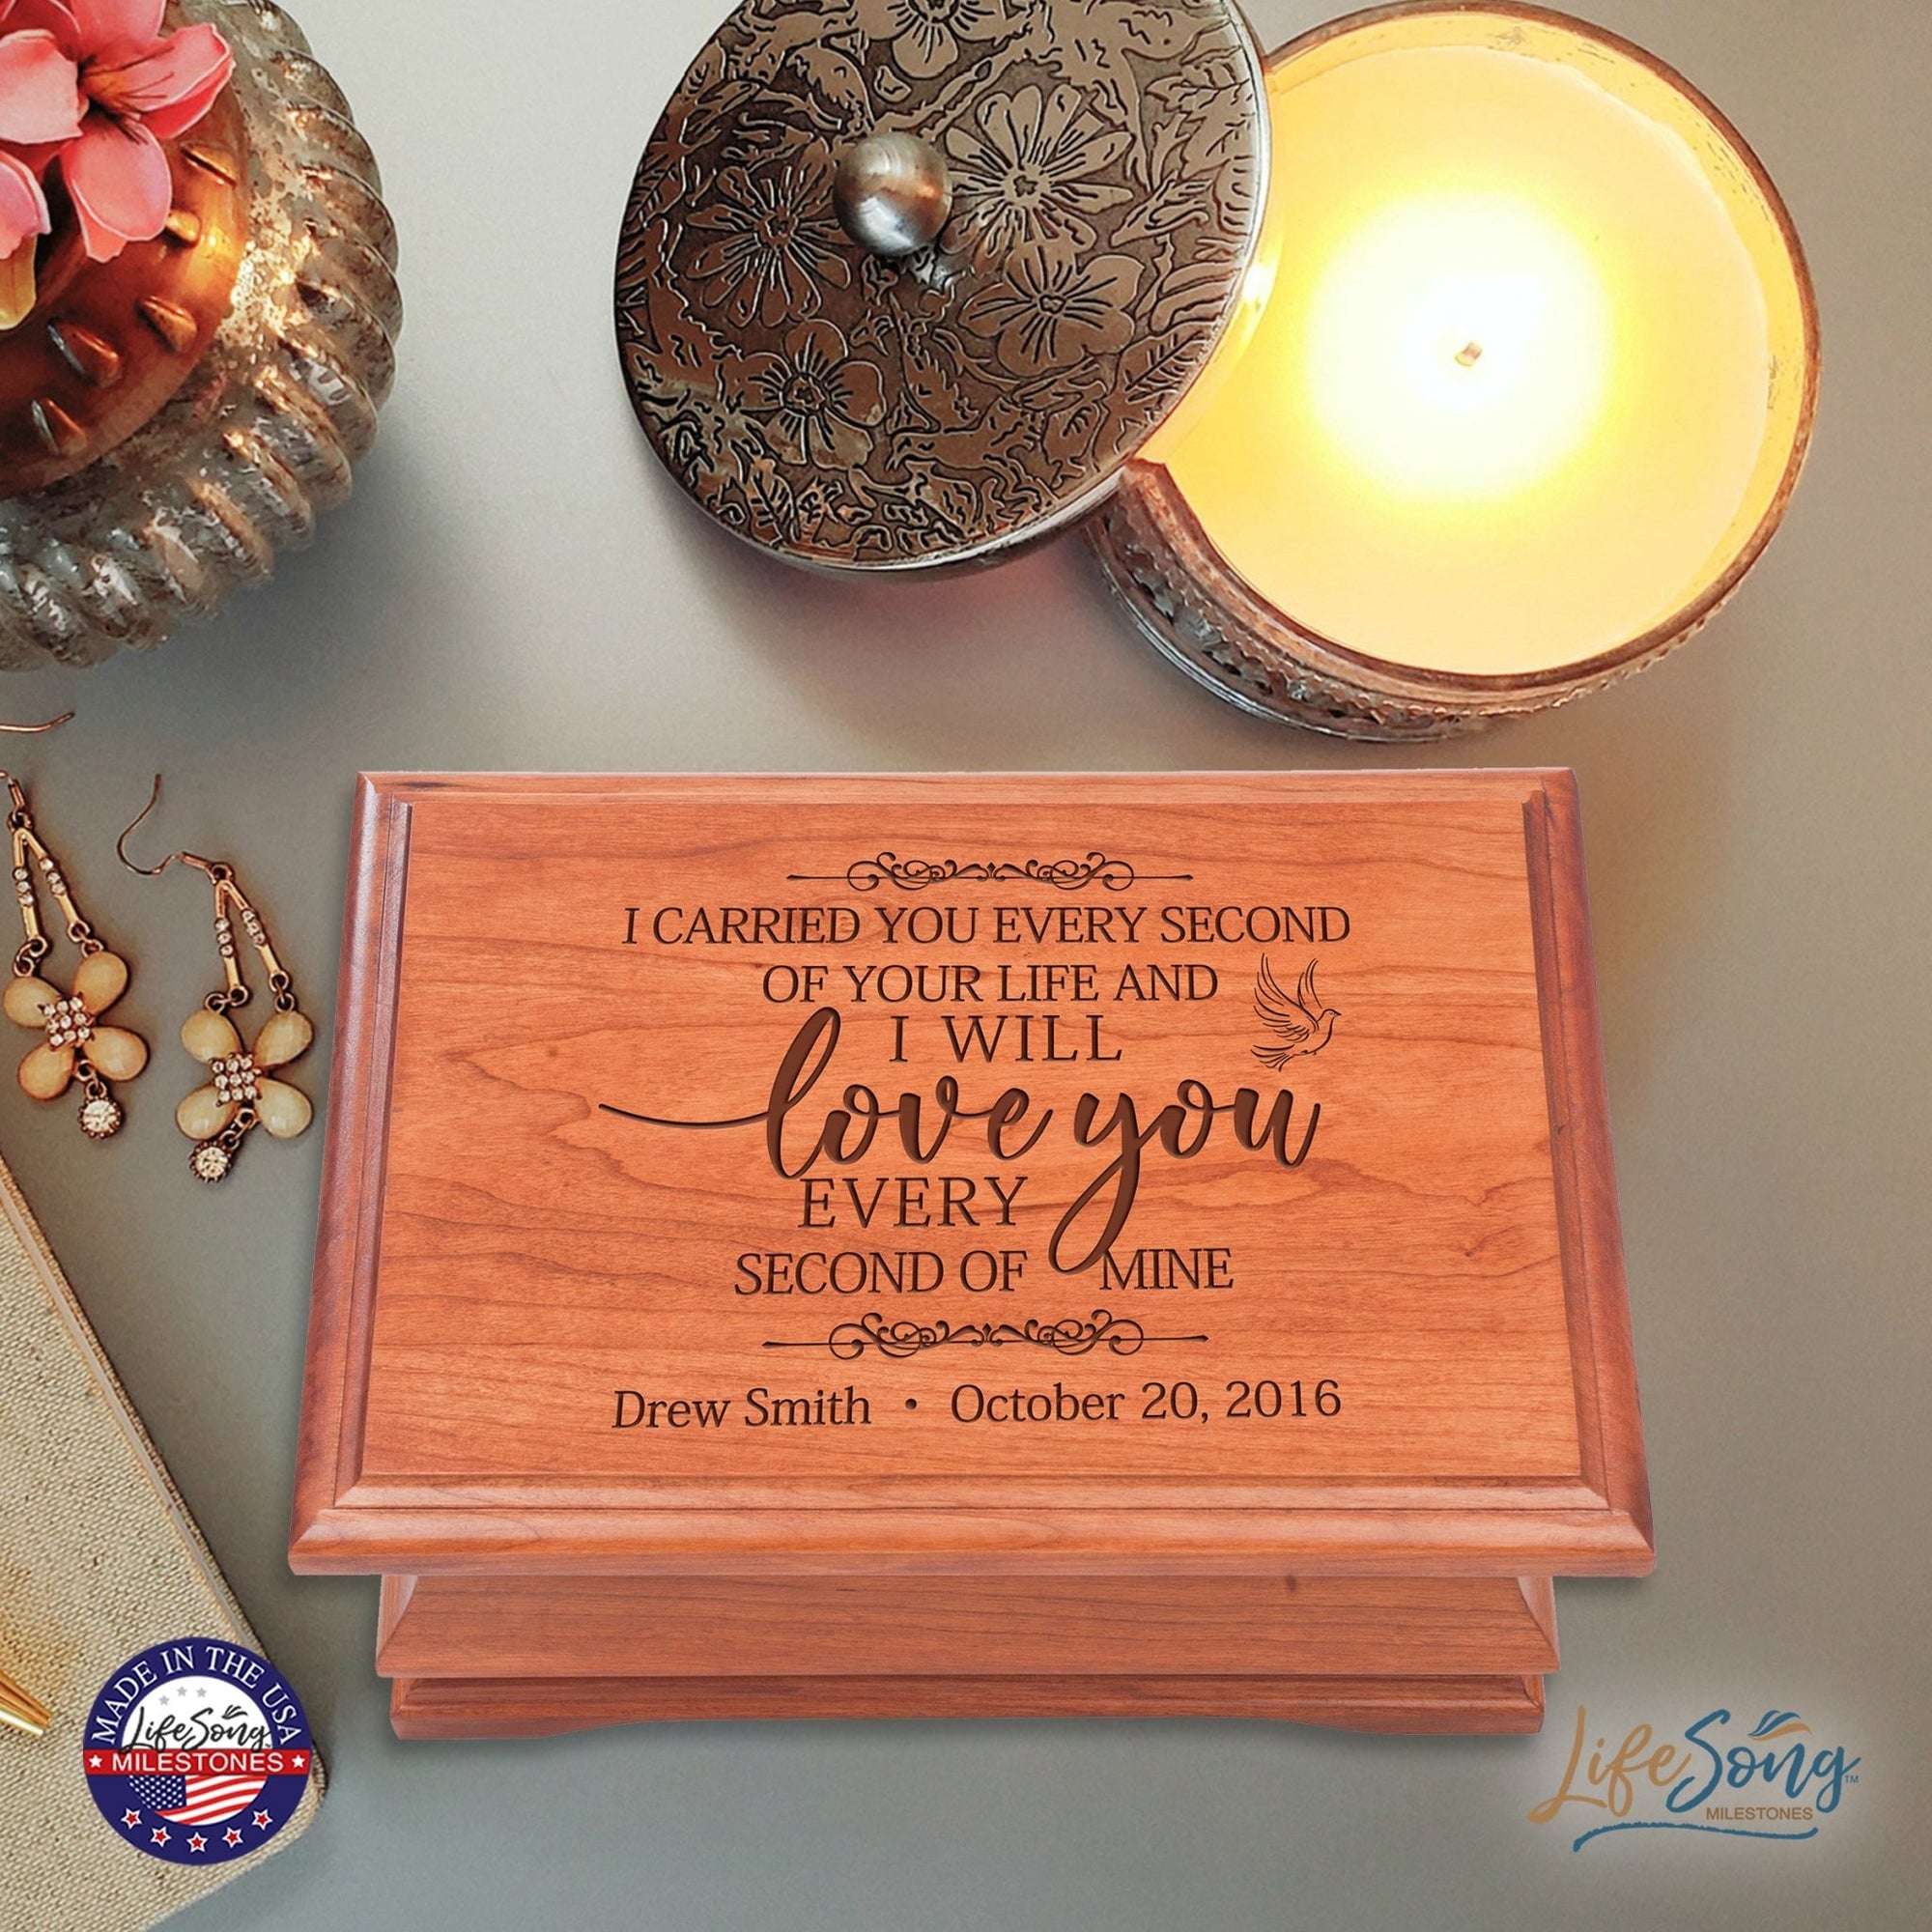 Personalized Wooden Memorial Jewelry Box Organizer 11.5x8.25 – I Carried You Every Second - LifeSong Milestones